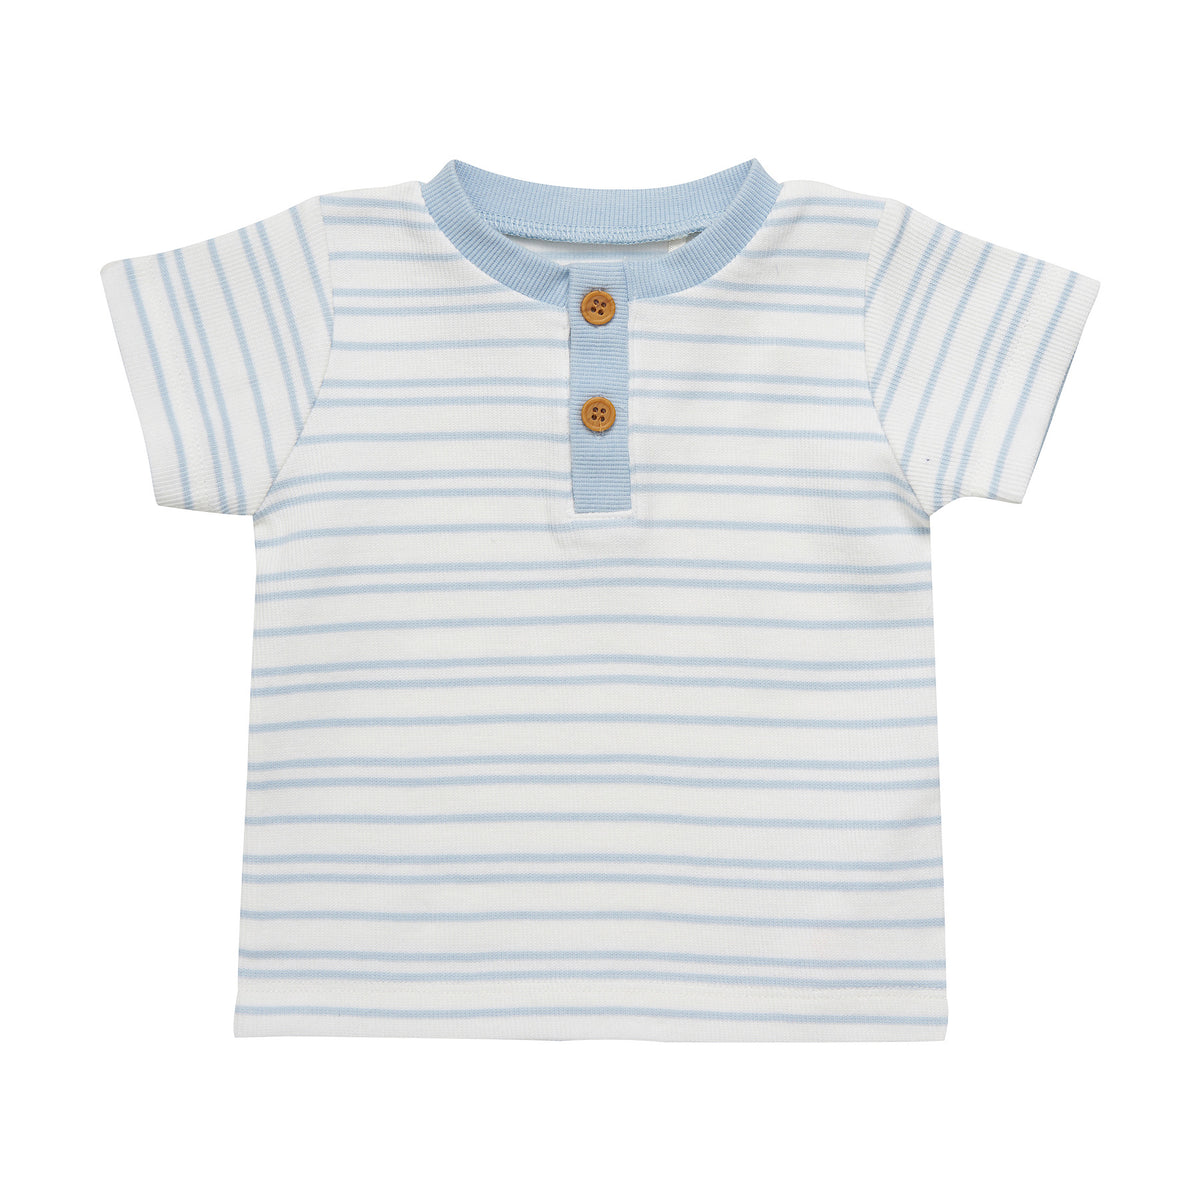 Blue Striped Tee with Wooden Button Detailing